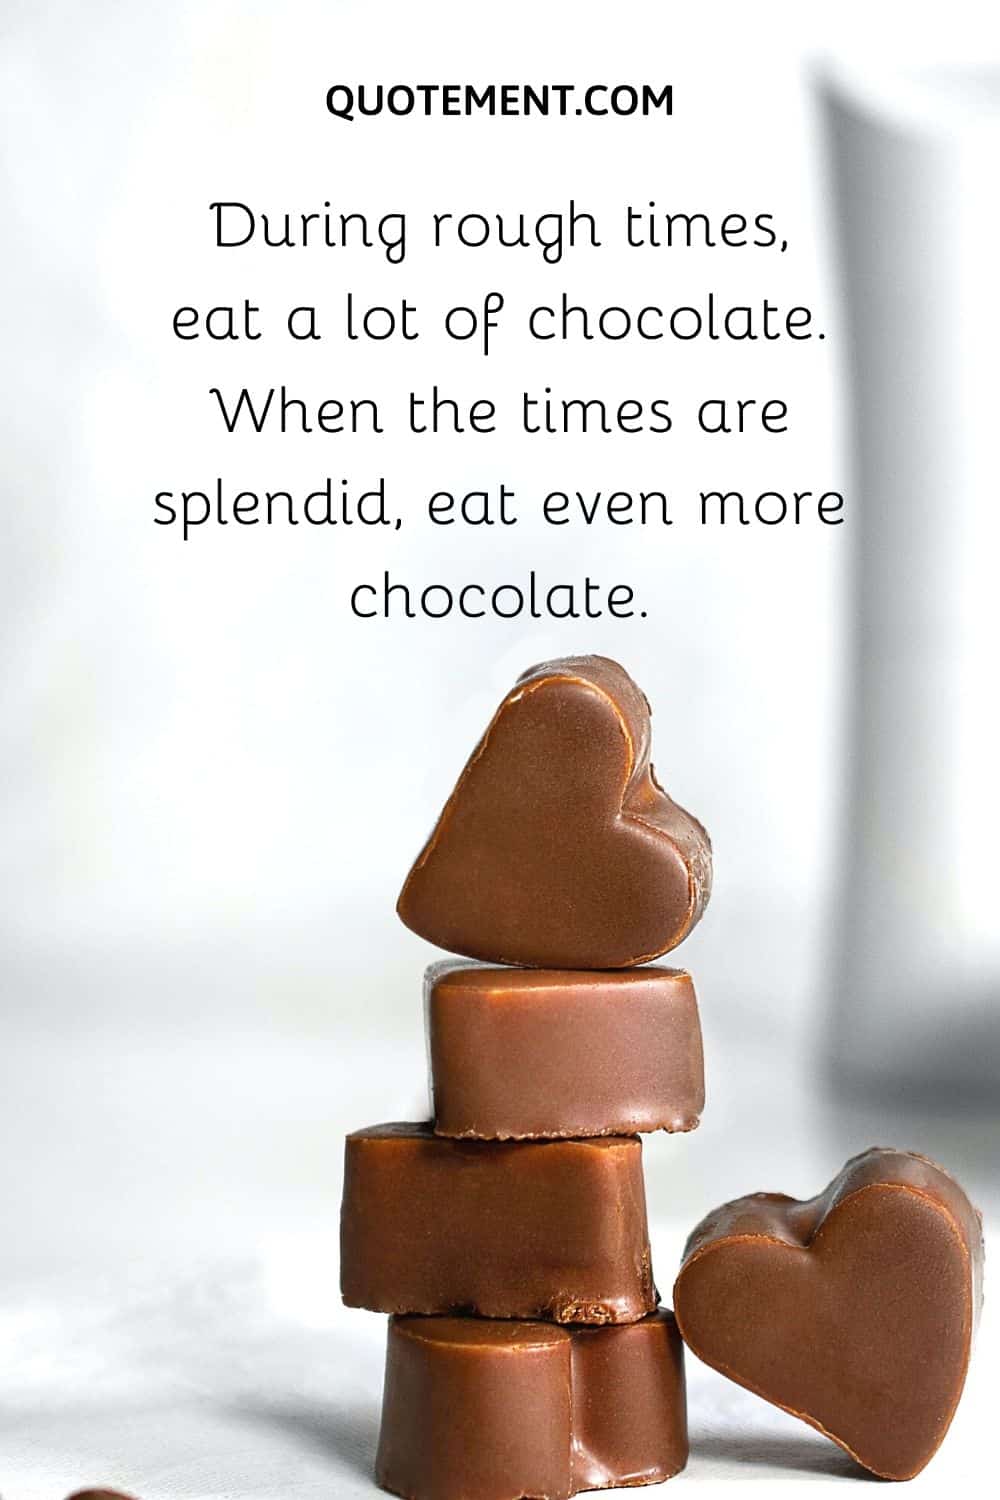 During rough times, eat a lot of chocolate. When the times are splendid, eat even more chocolate.